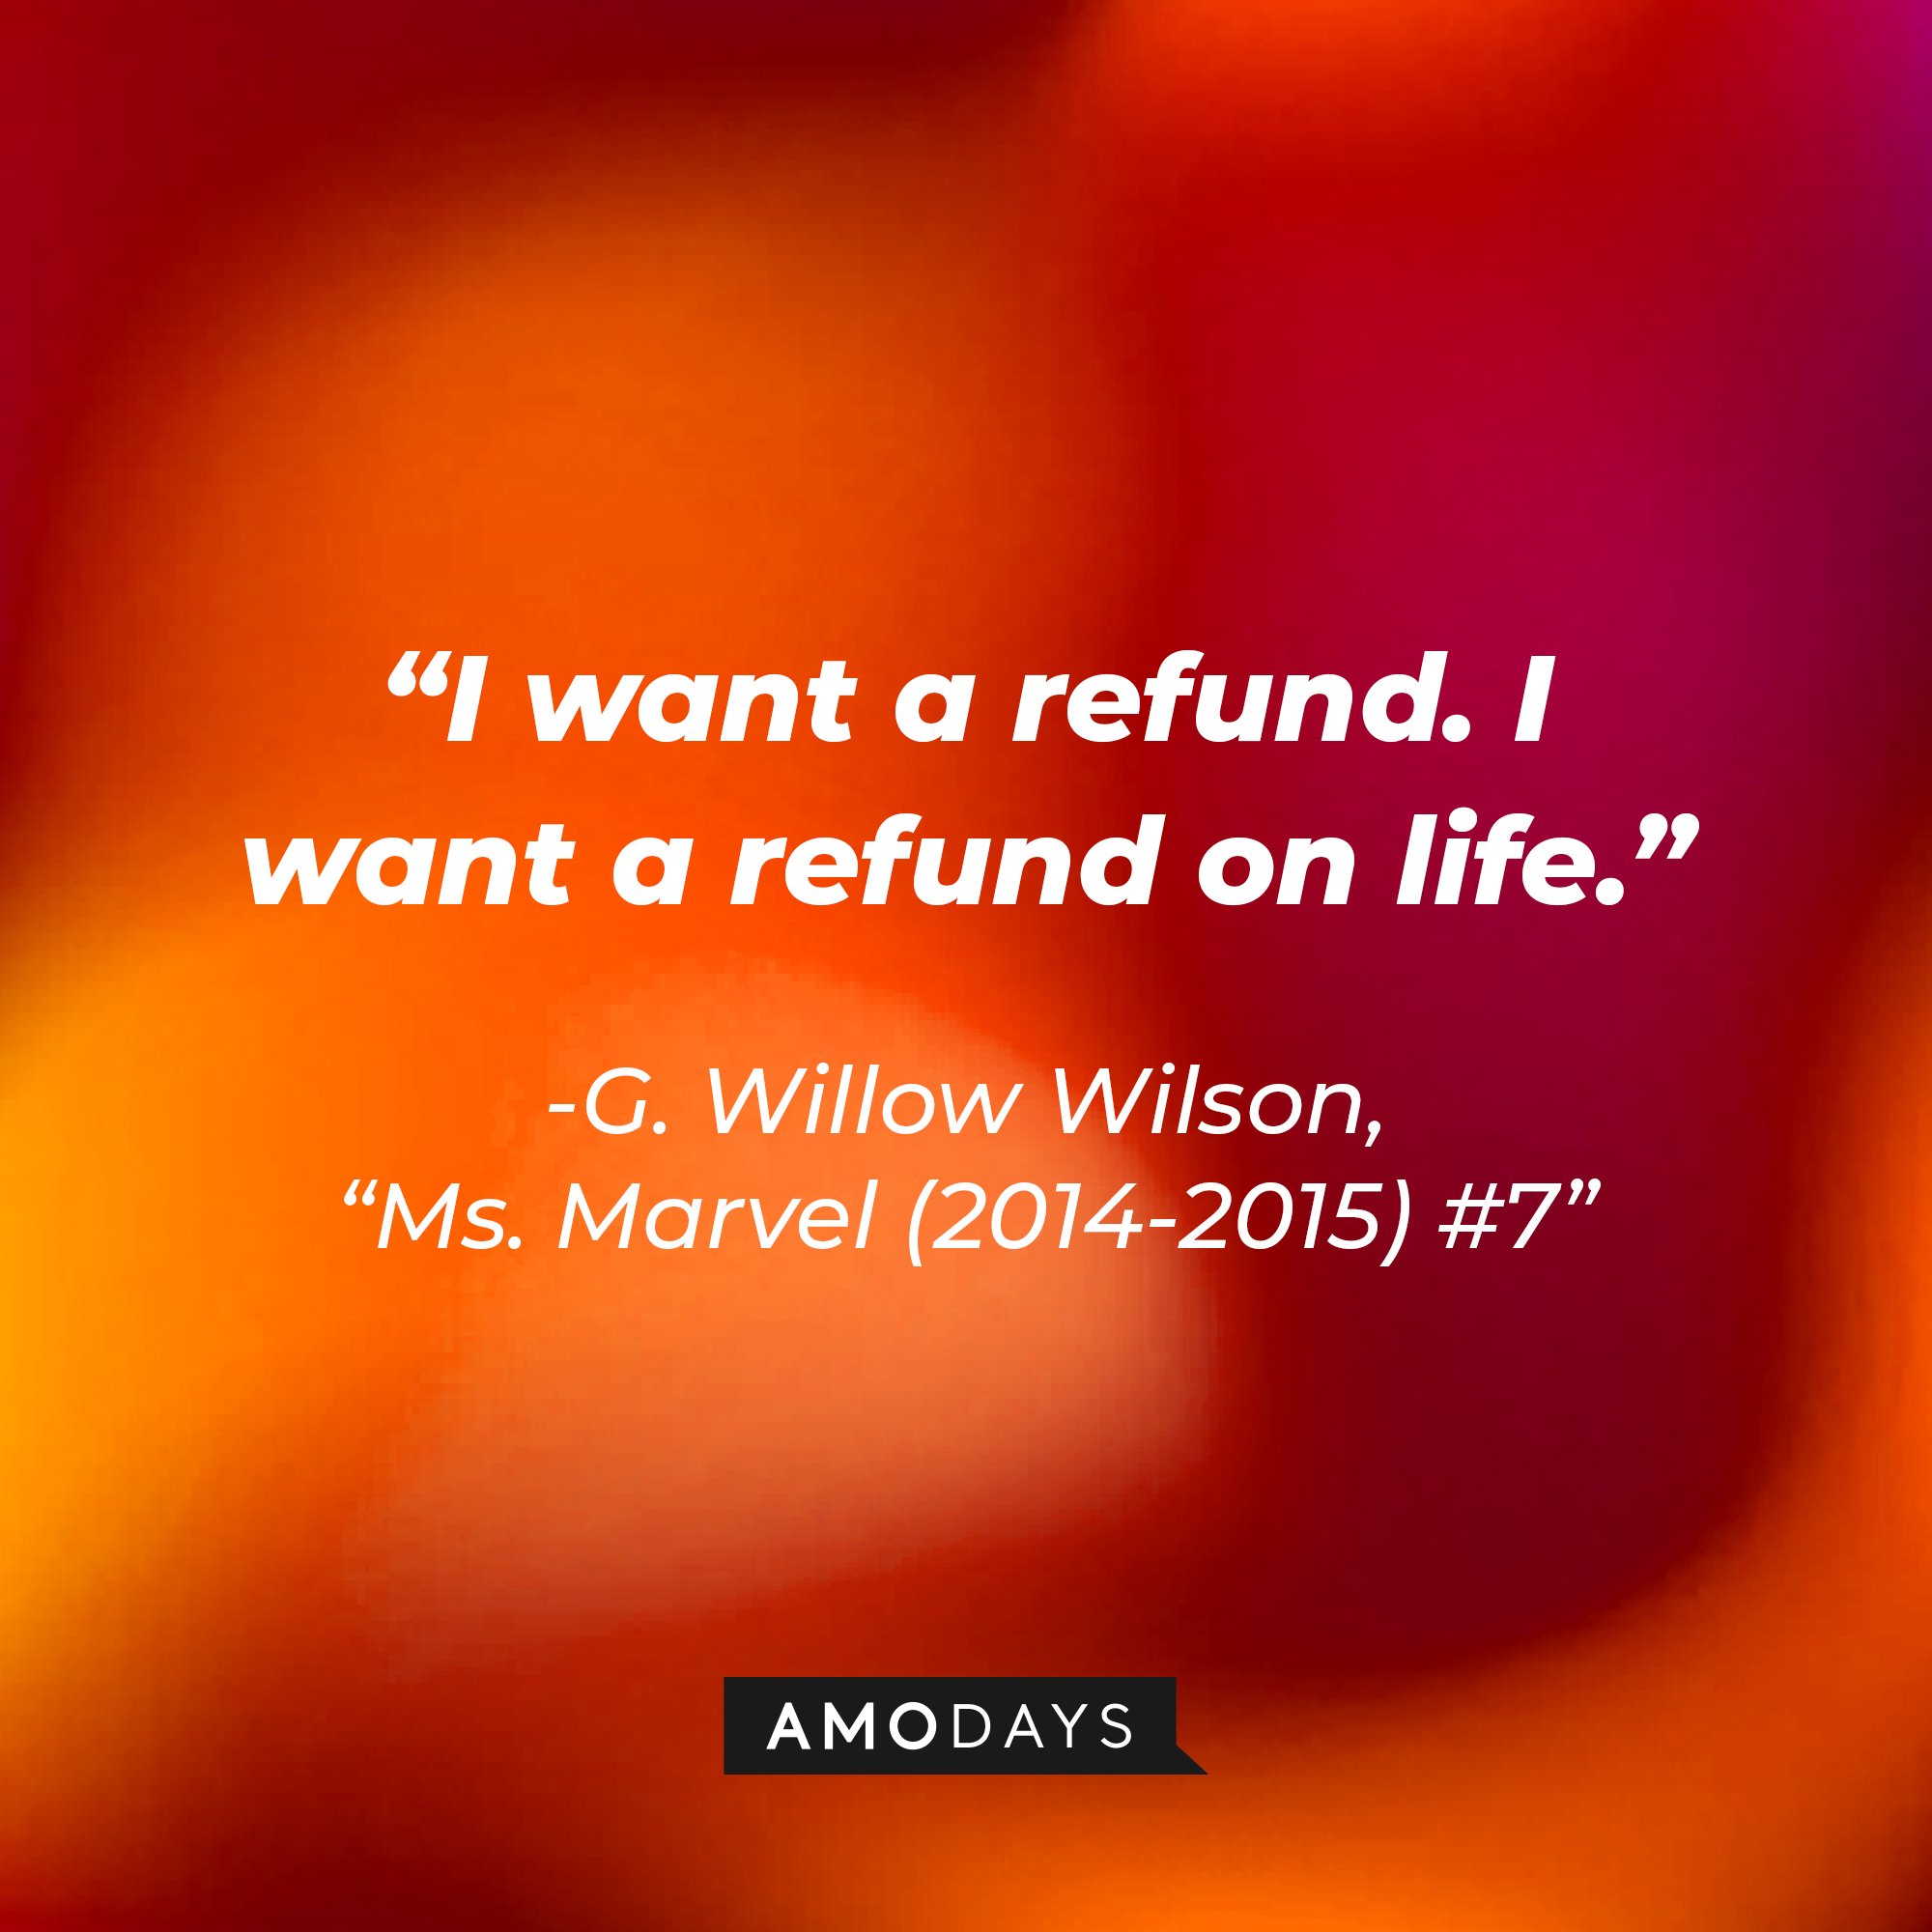 G. Willow Wilson’s quote from "Ms. Marvel (2014-2015) #7": I want a refund. I want a refund on life." | Image: AmoDays